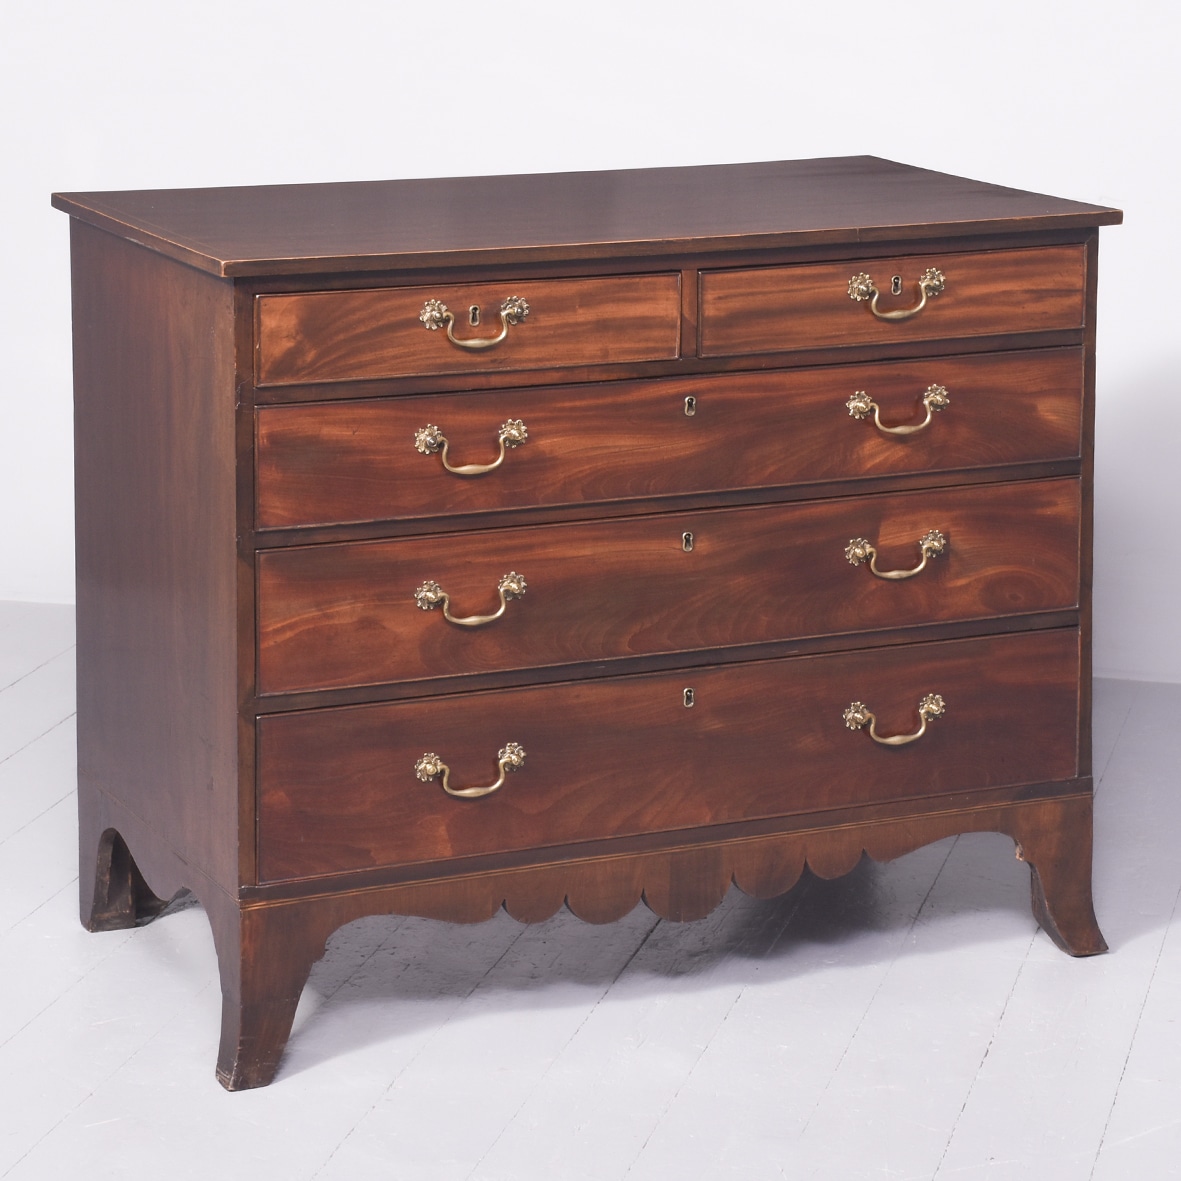 Late George III Mahogany Chest of Drawers antique chest of drawers Antique Chest Of Drawers